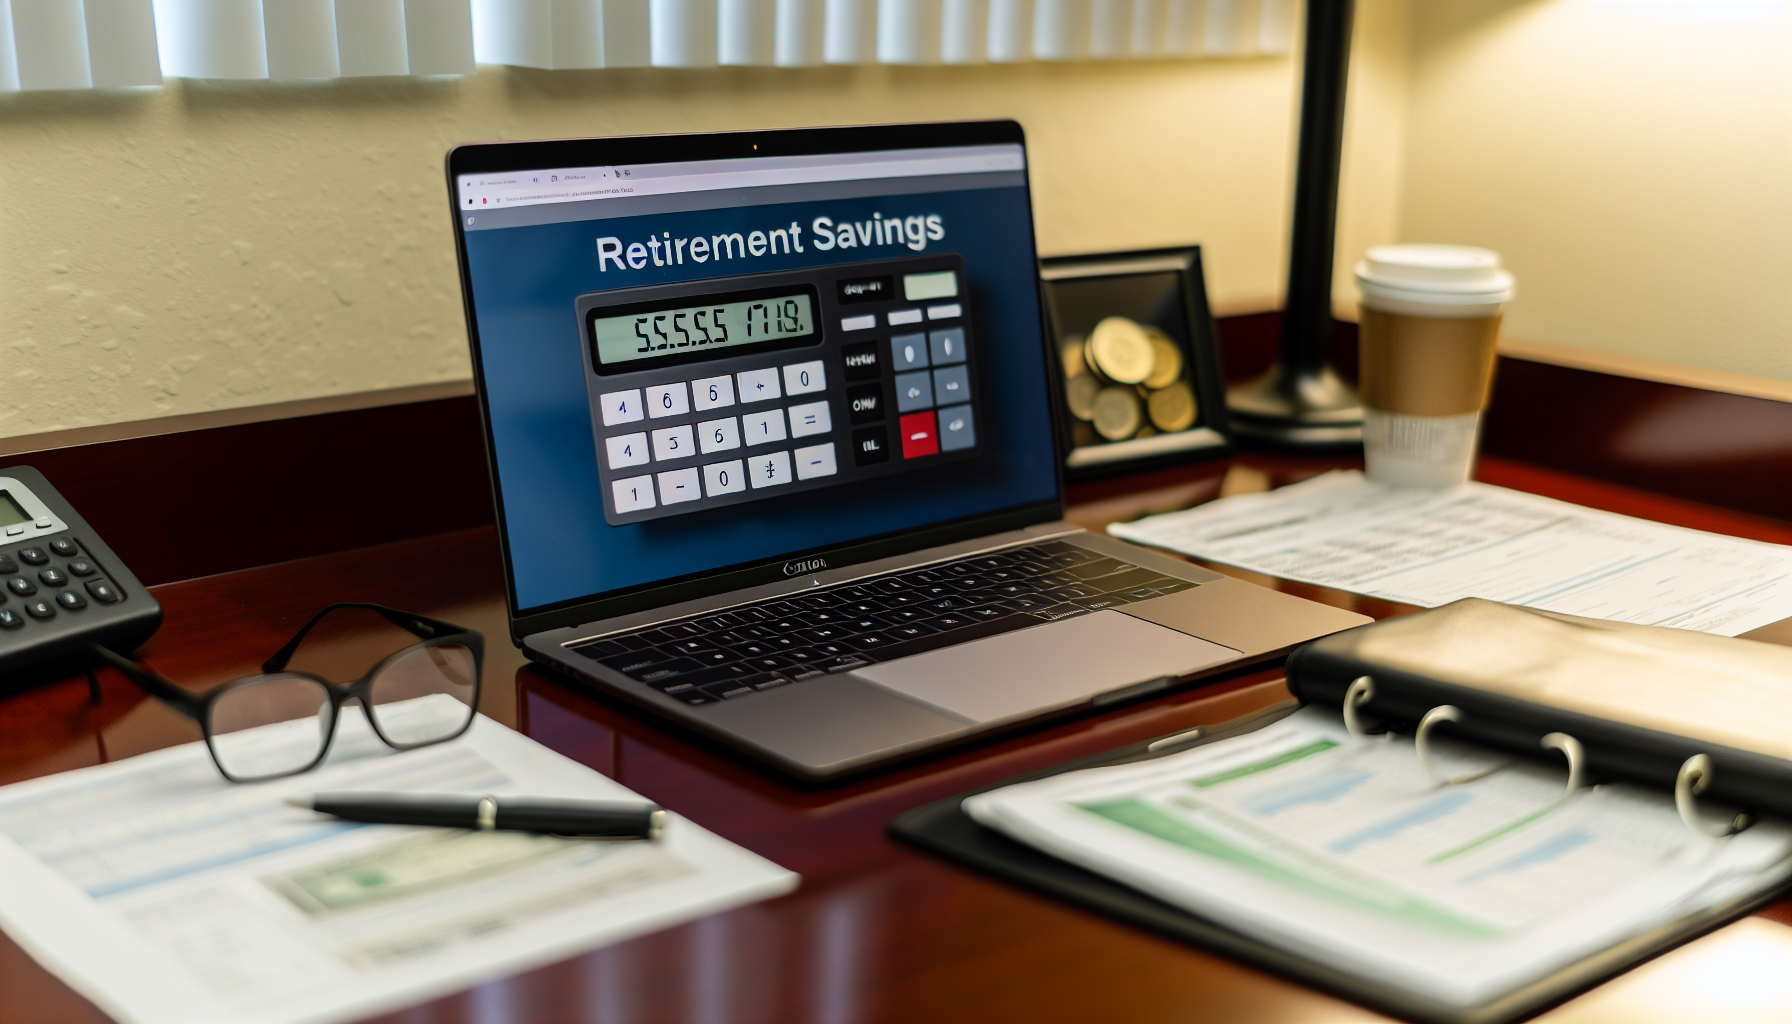 A retirement savings calculator and financial documents in Homestead, FL